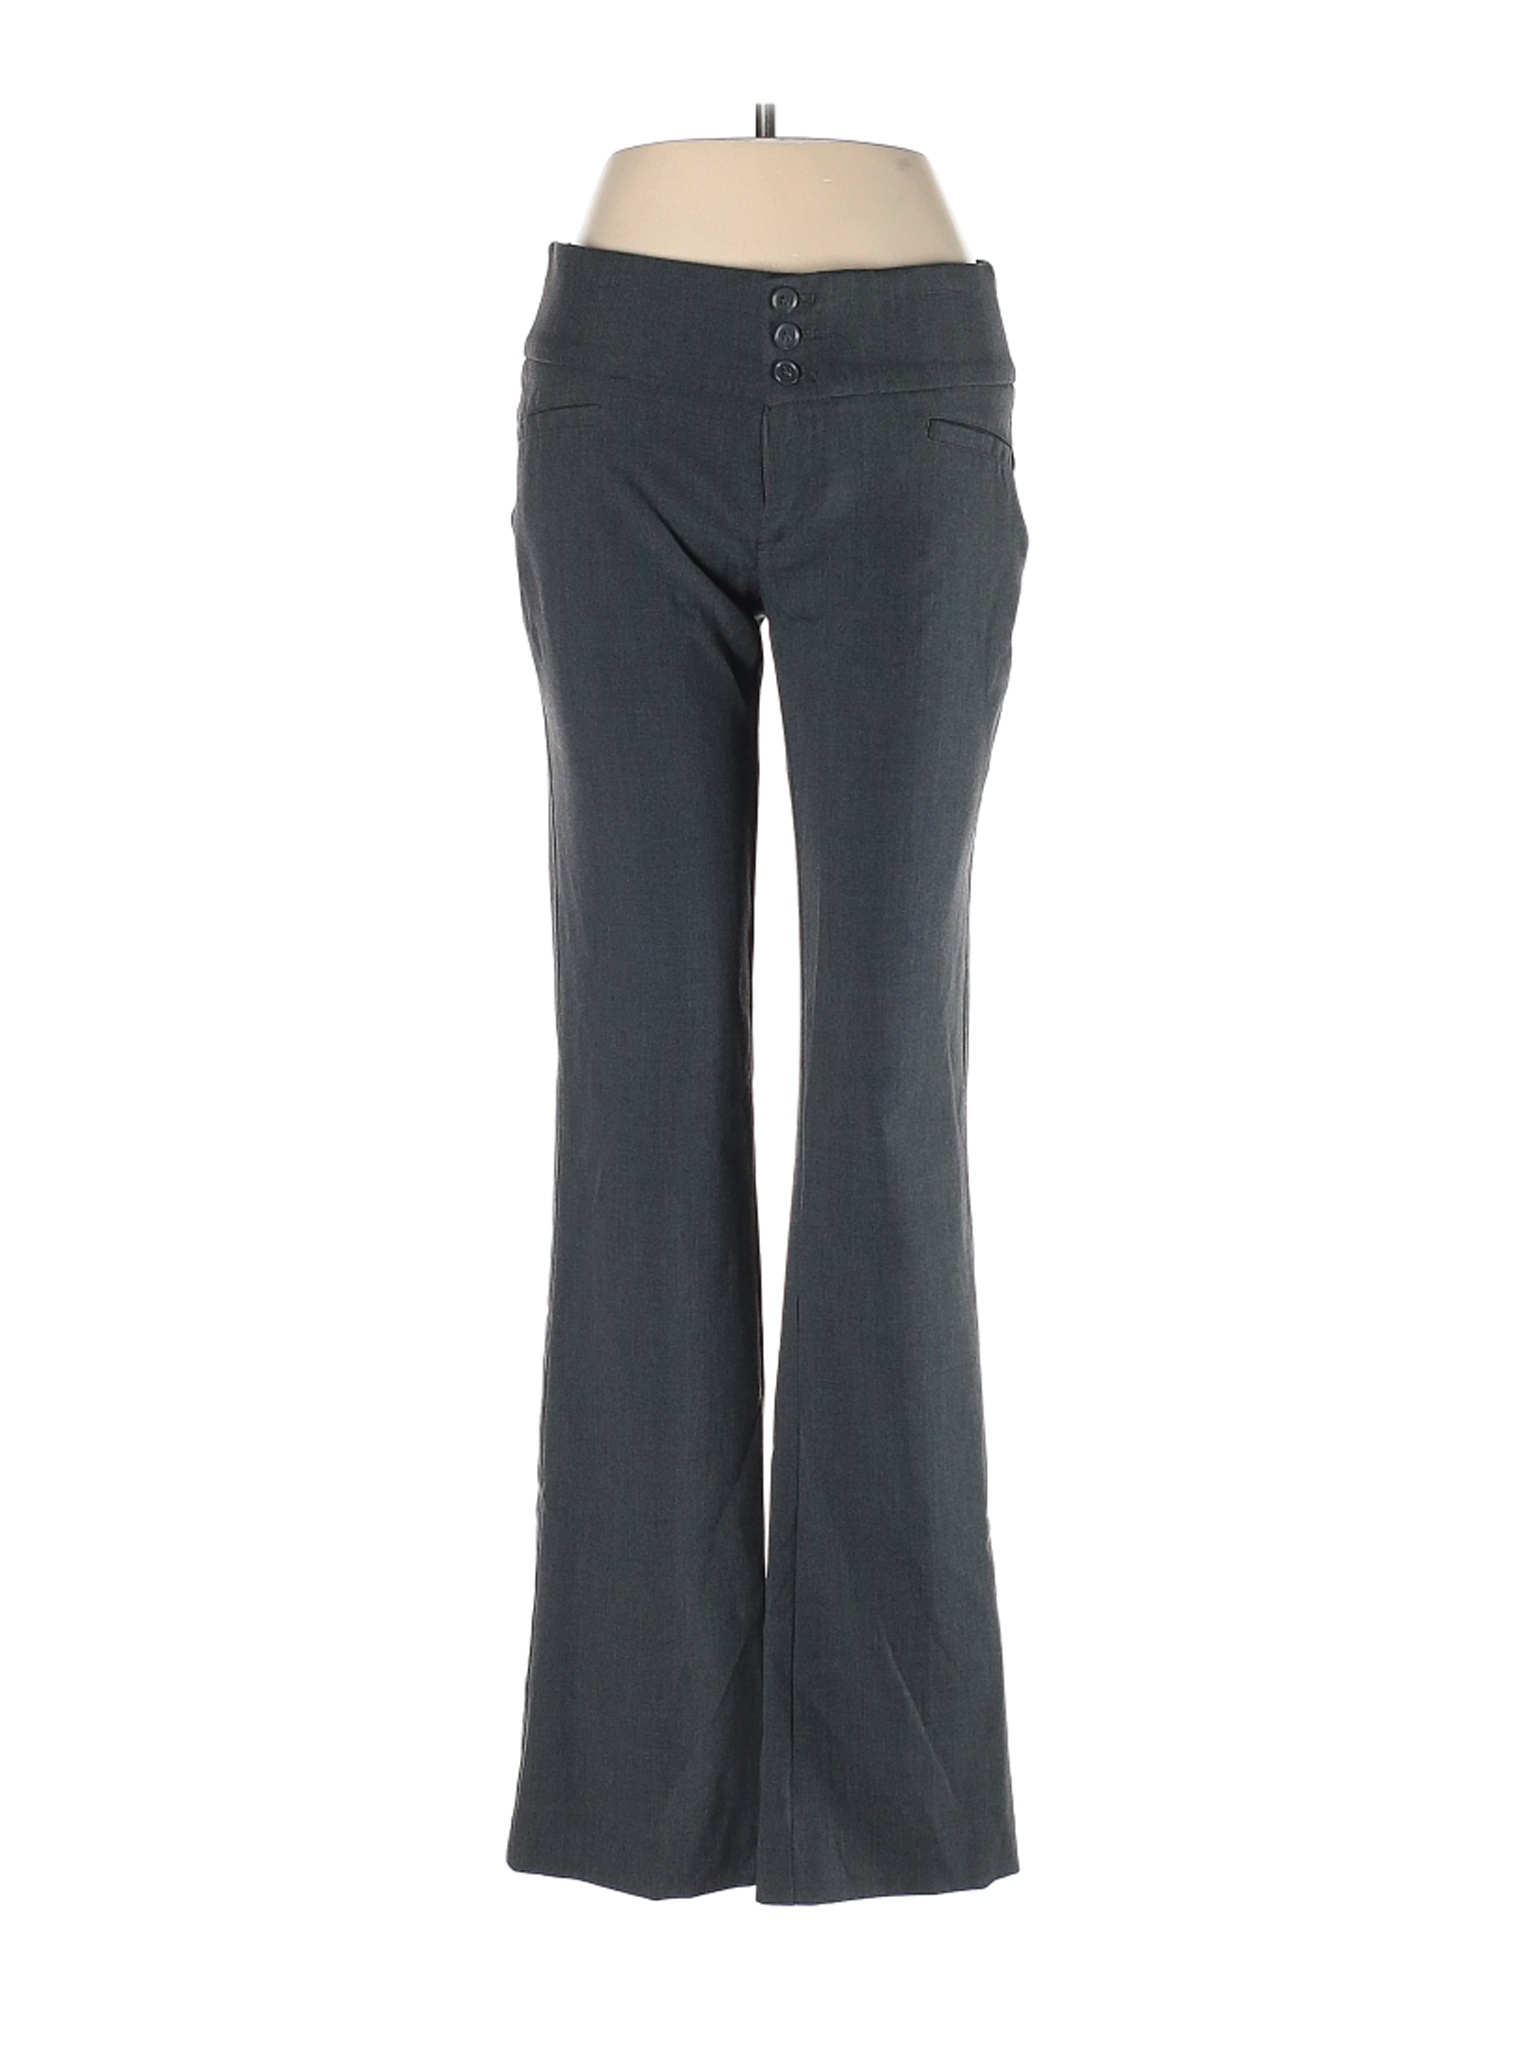 Hollywould Women Gray Casual Pants 3 | eBay